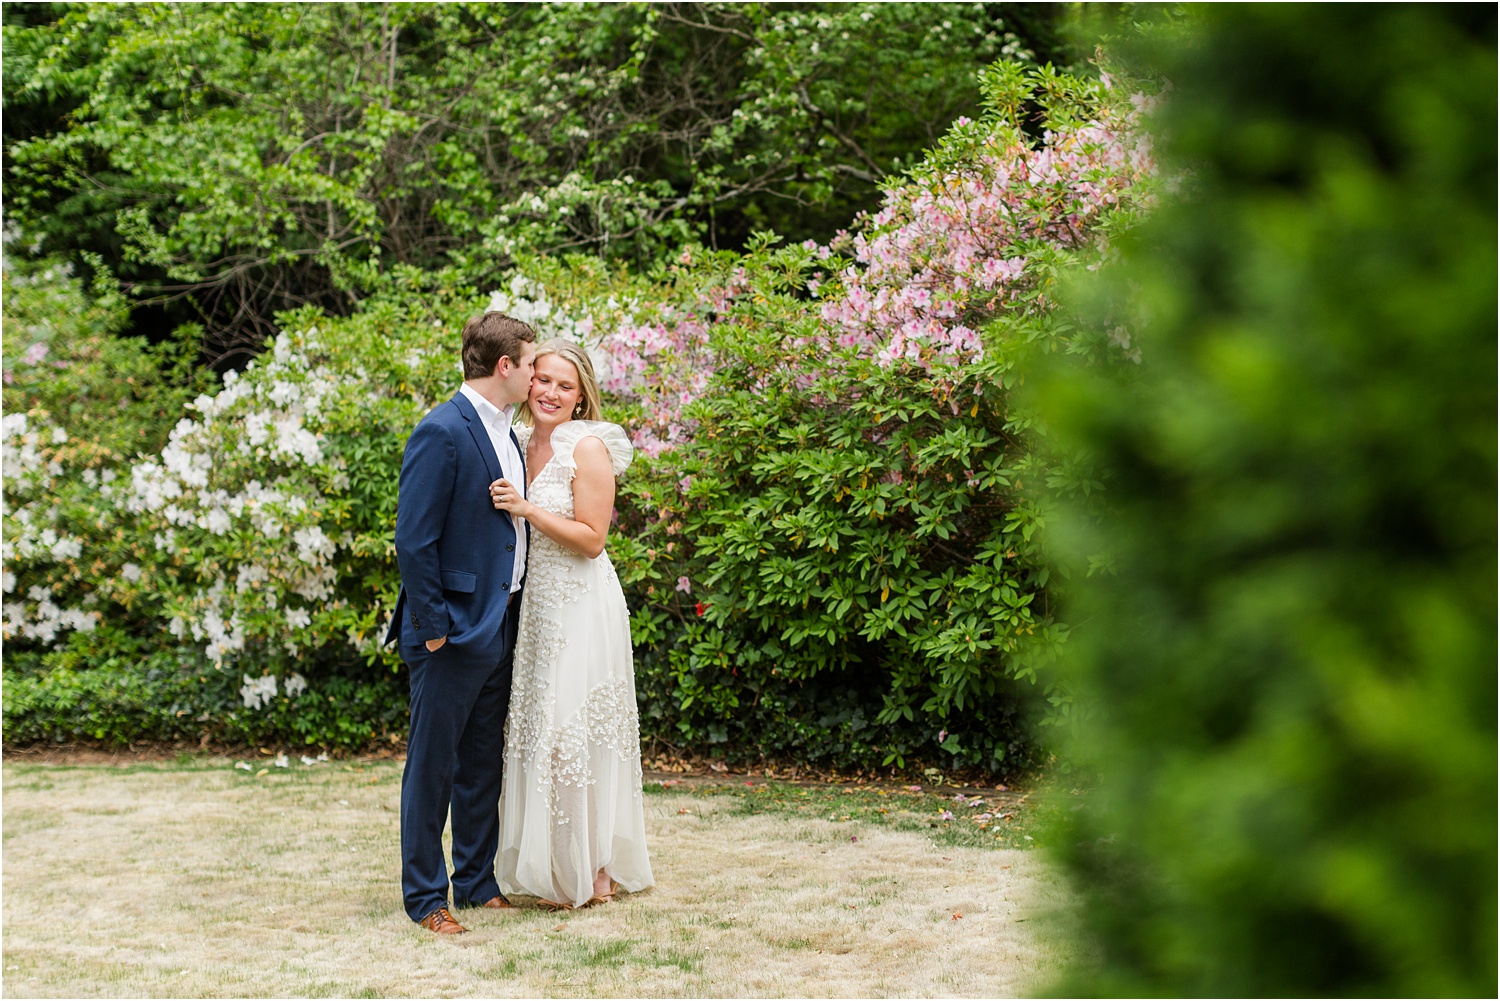 Private Garden Engagement Session